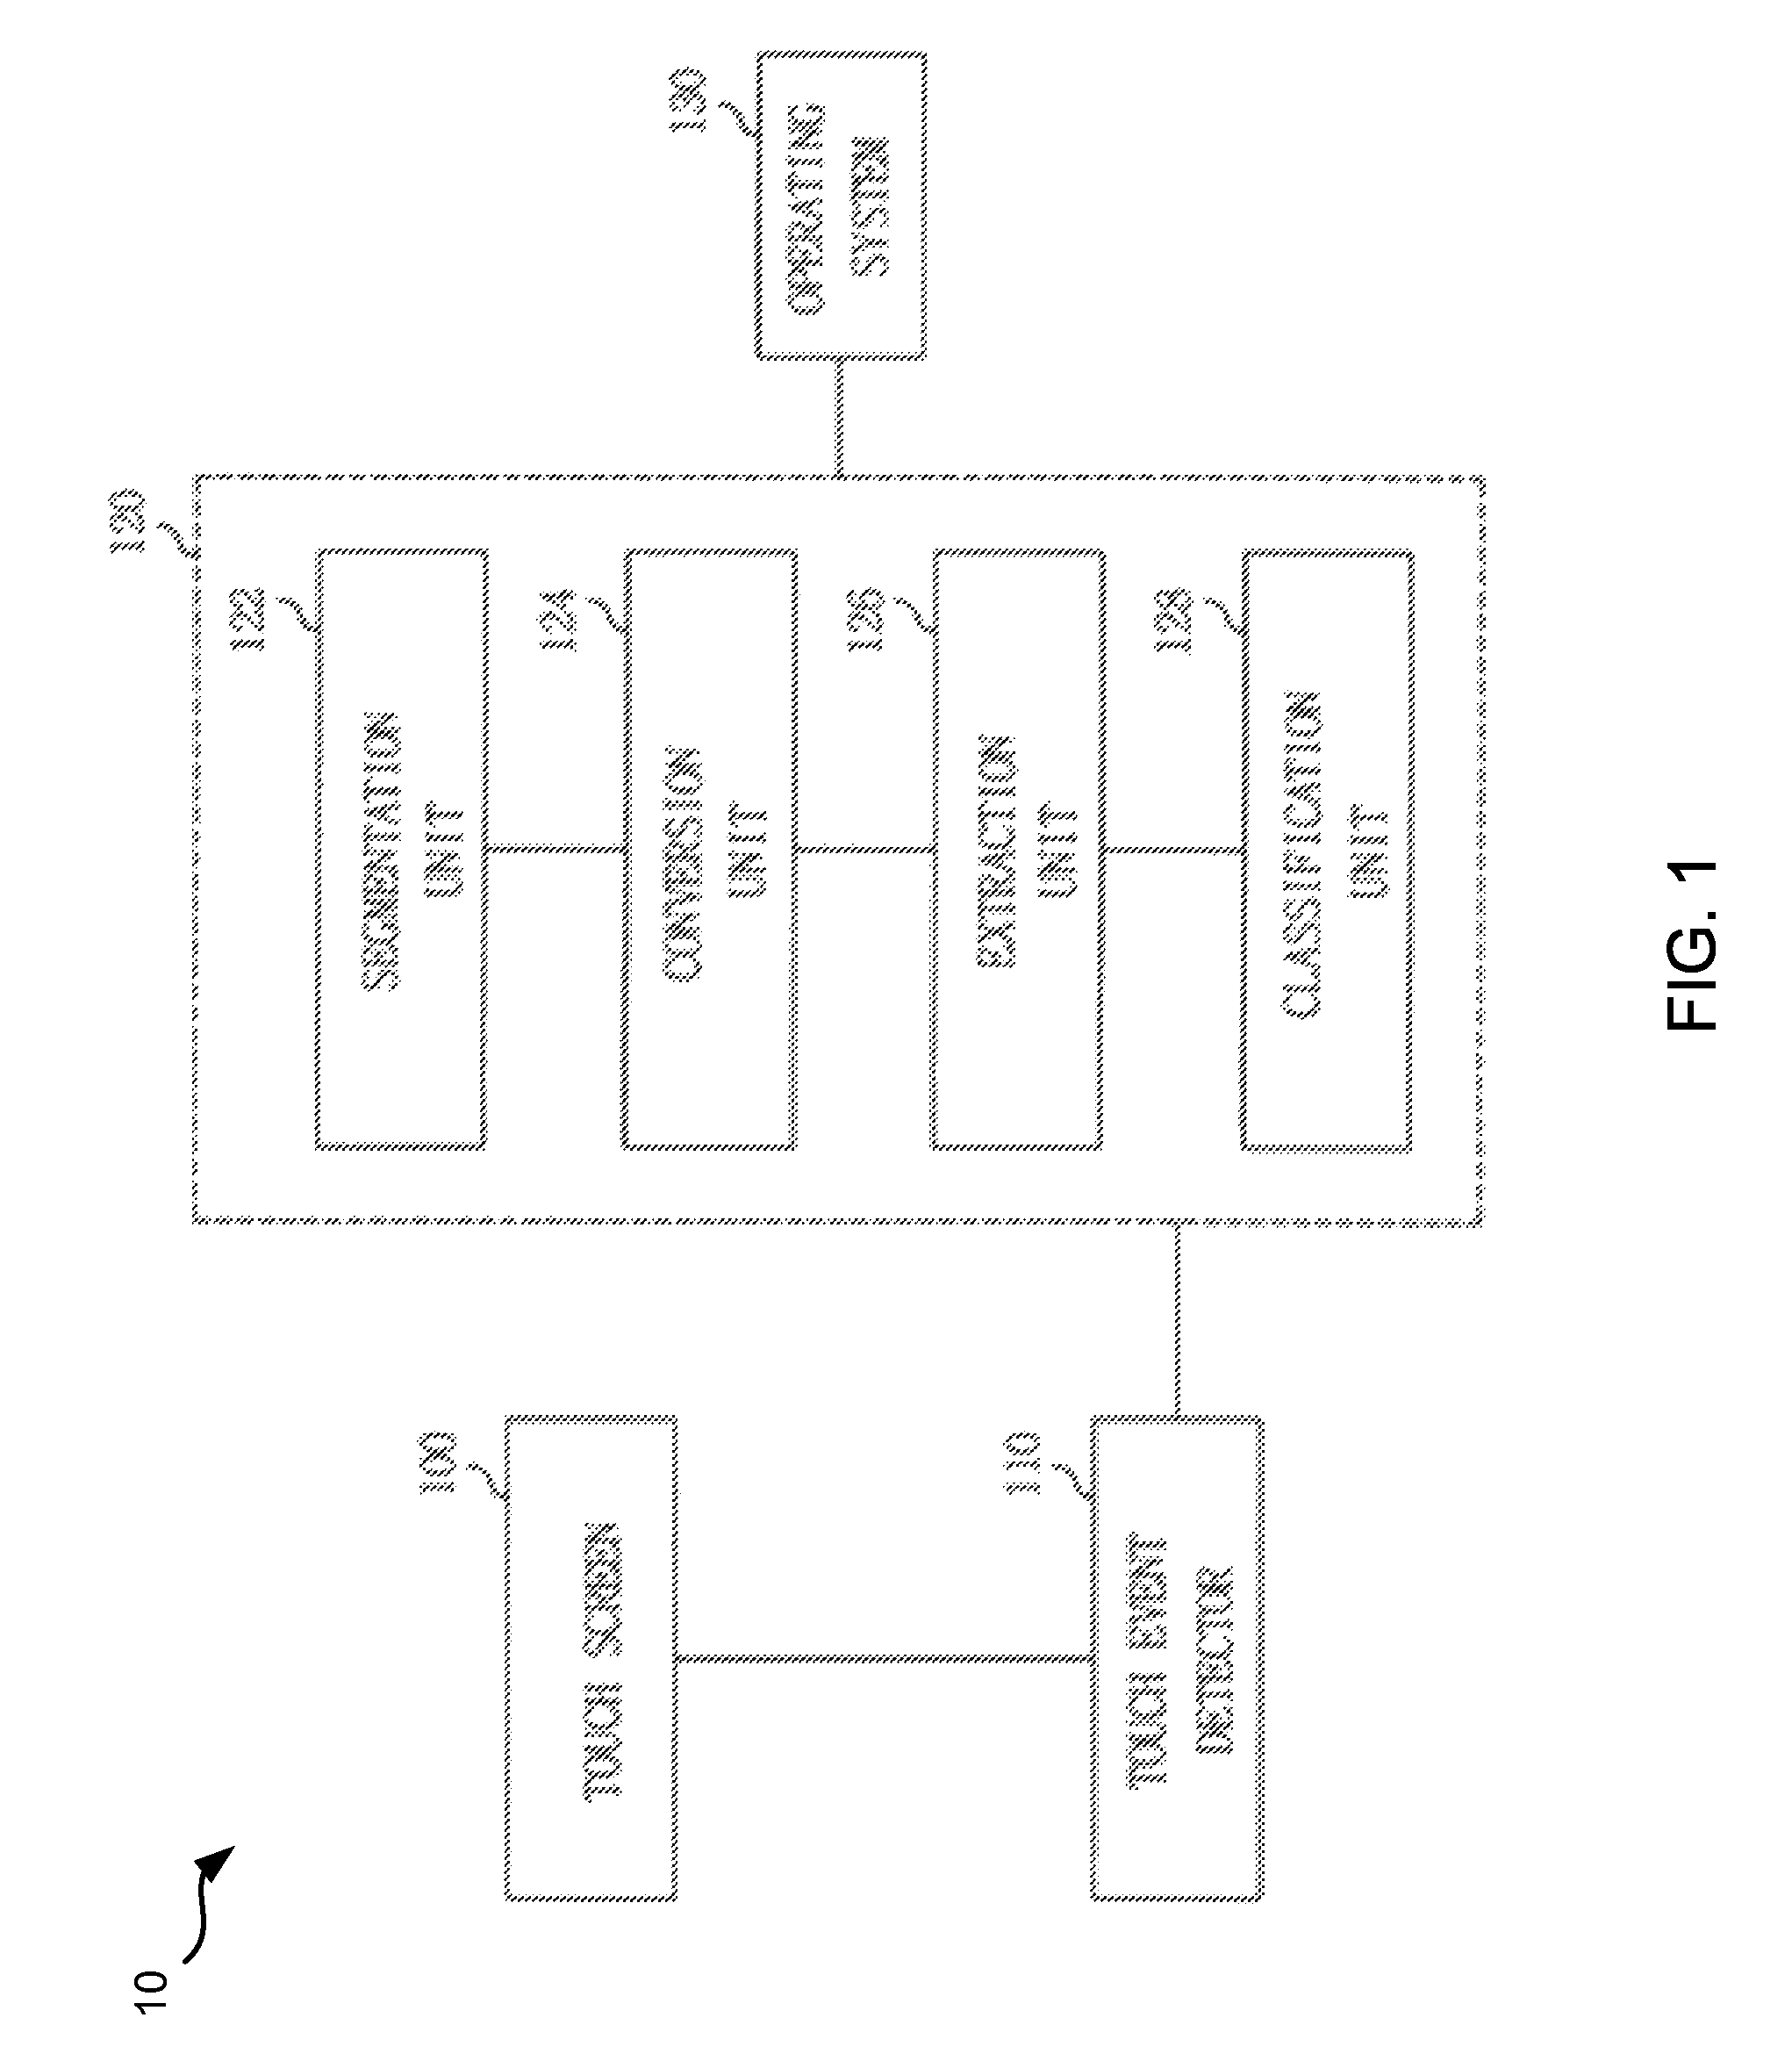 Method and apparatus for differentiating touch screen users based on touch event analysis